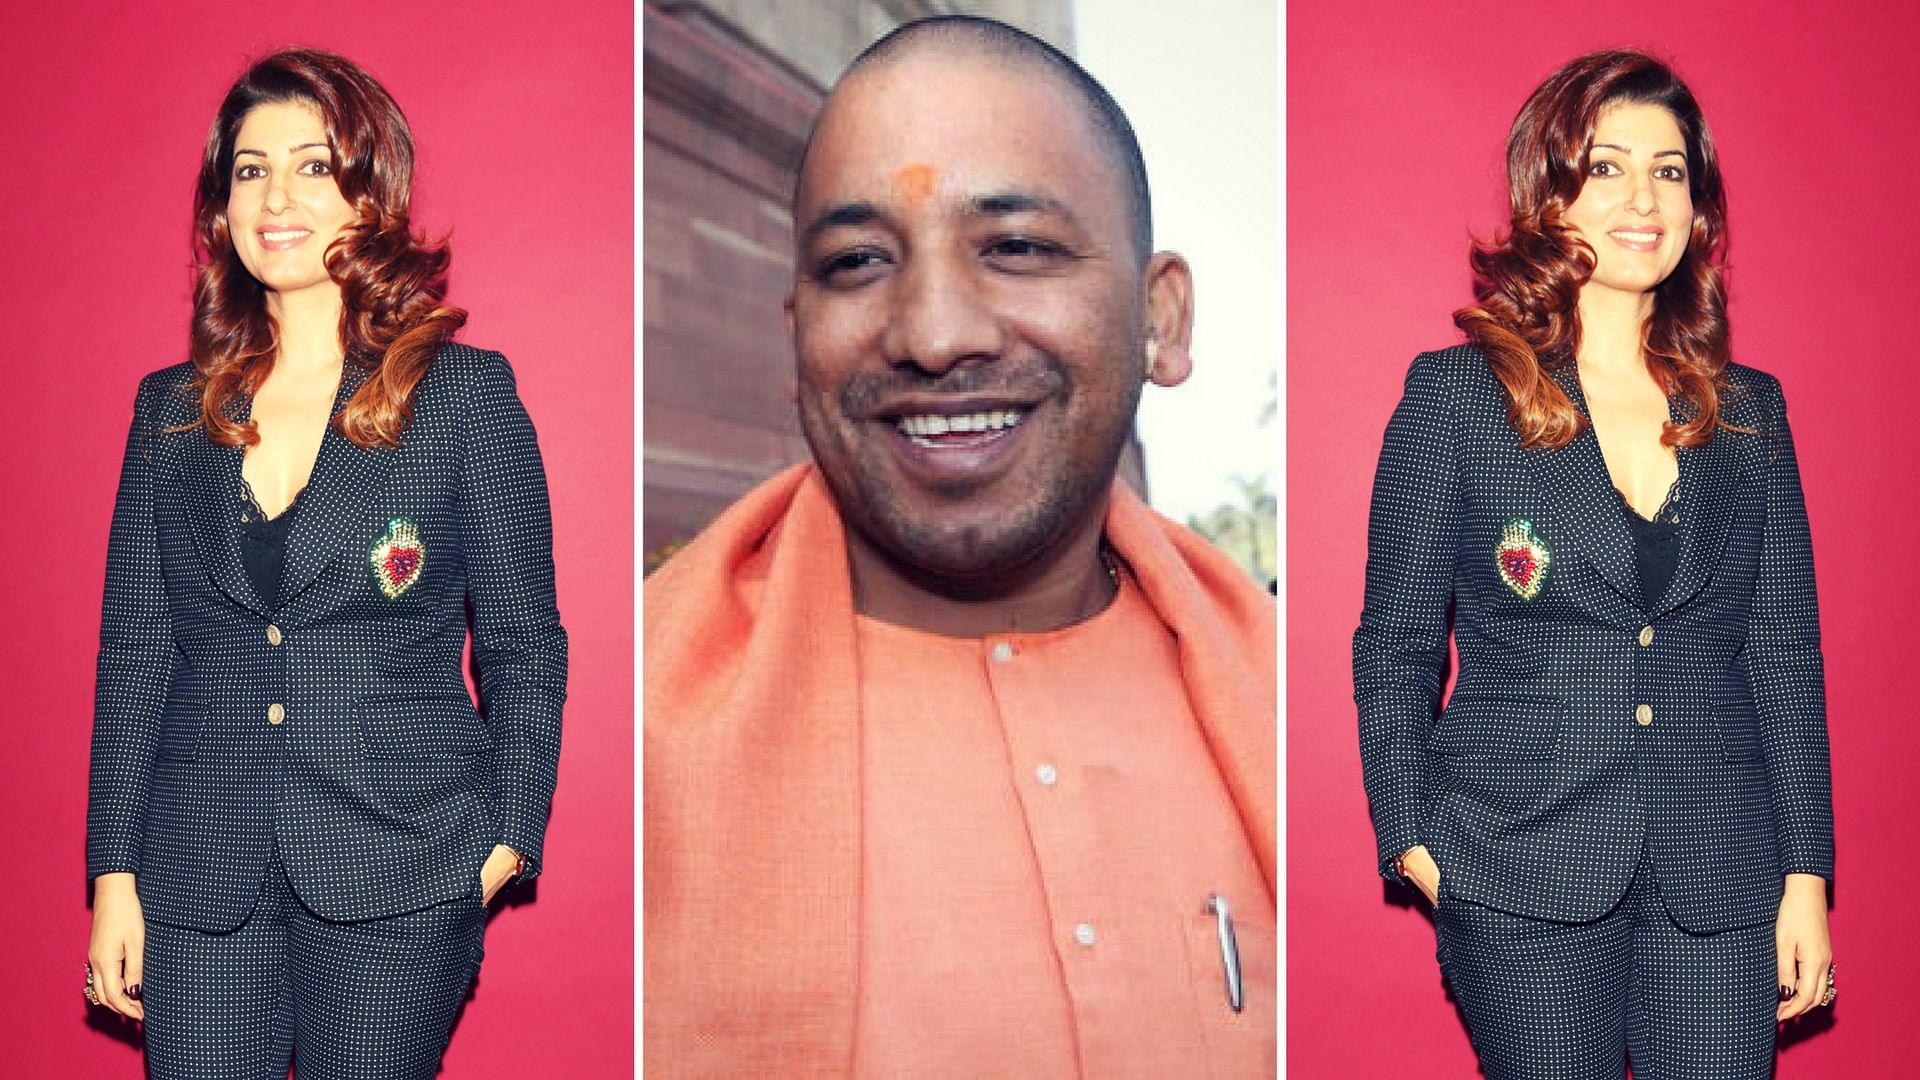 Twinkle Khanna has advice for UP CM Yogi Adityanath. (Photo: Yogen Shah/Altered by The Quint)